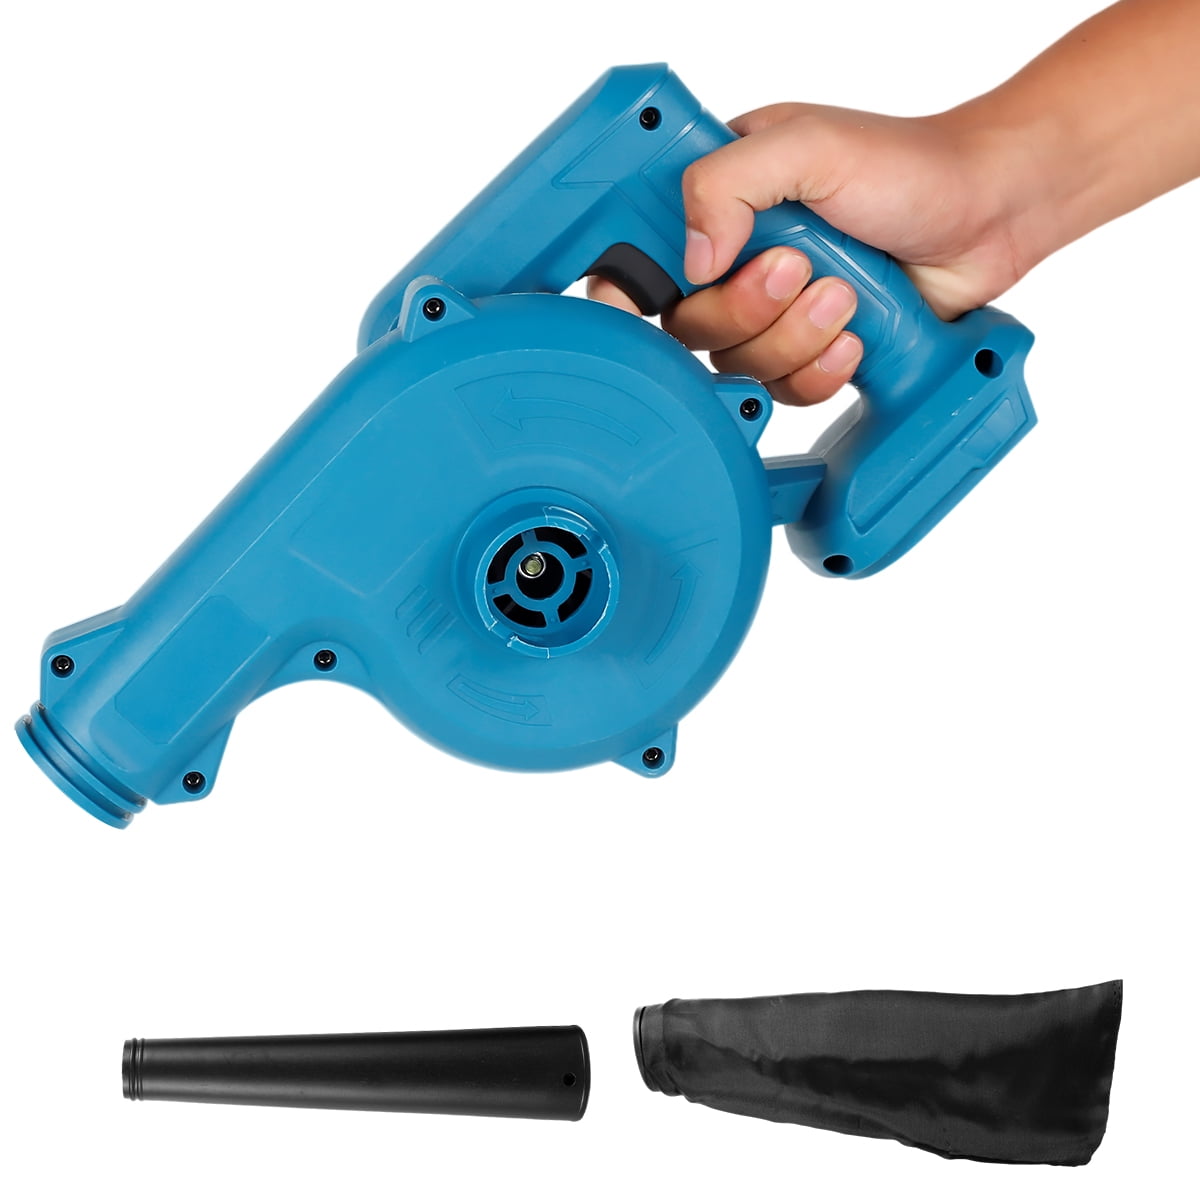 verlacod Cordless Air Blower Electric Handheld Leaf Blower with